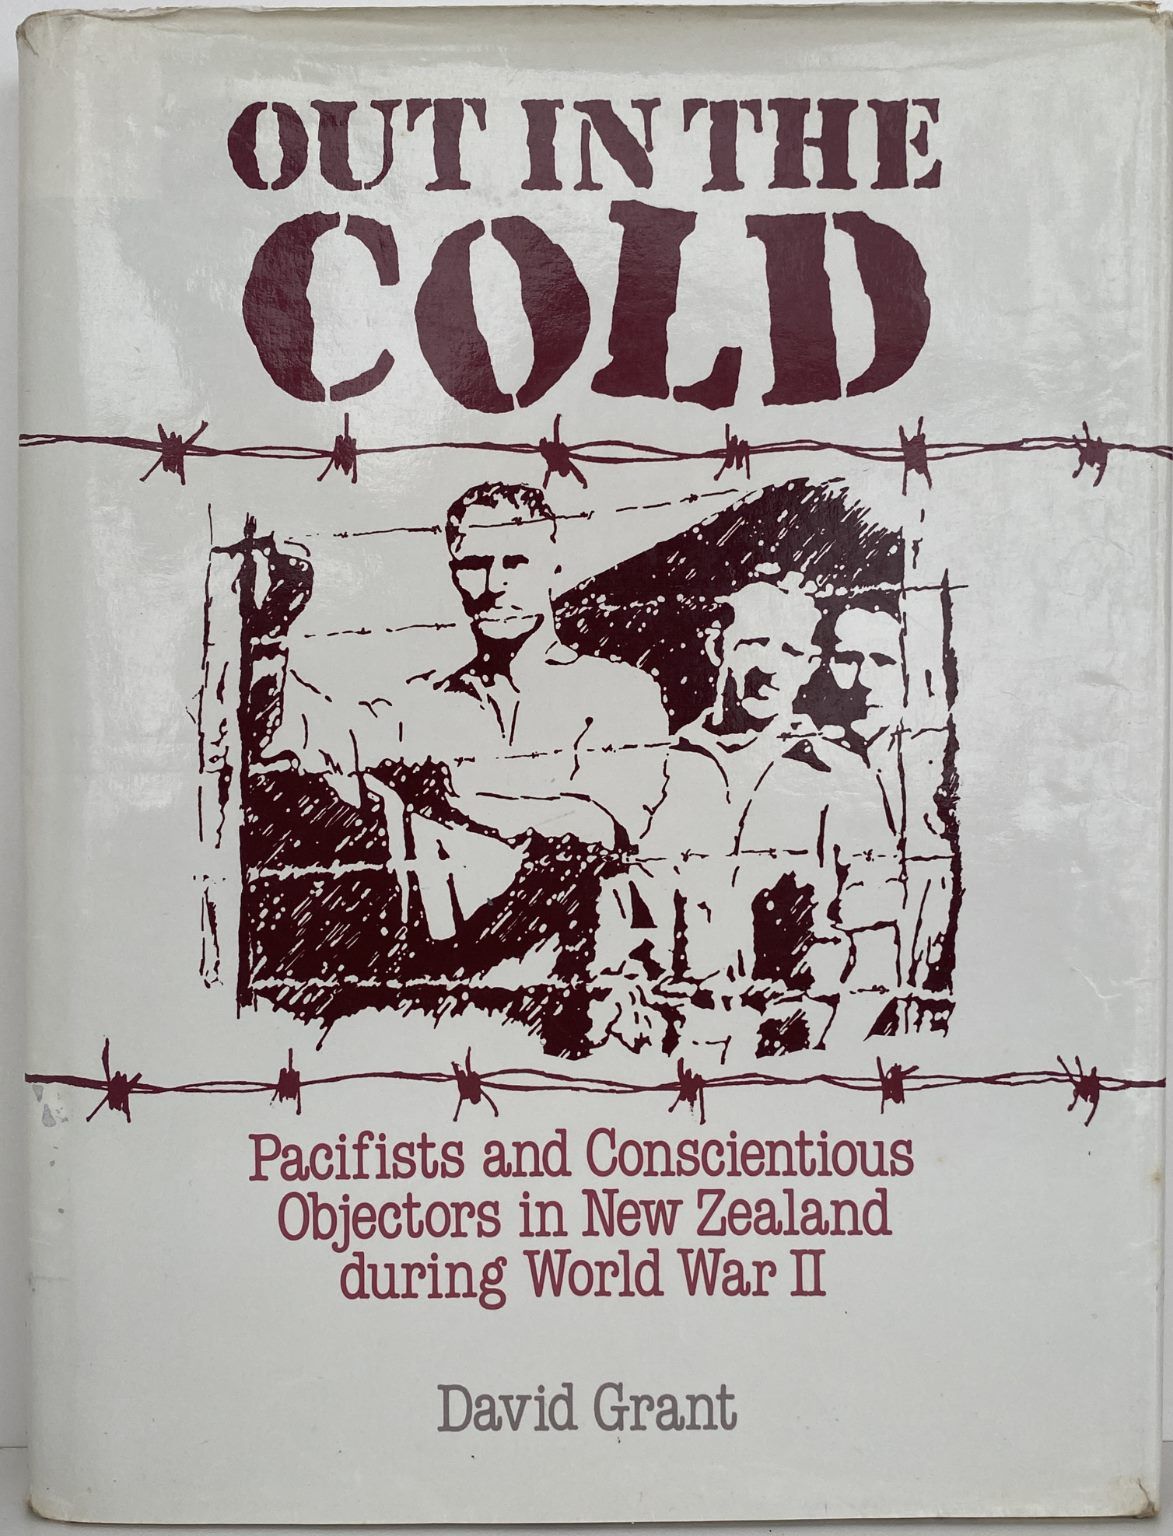 OUT IN THE COLD: Pacifists and Conscientious Objectors in NZ during WW II